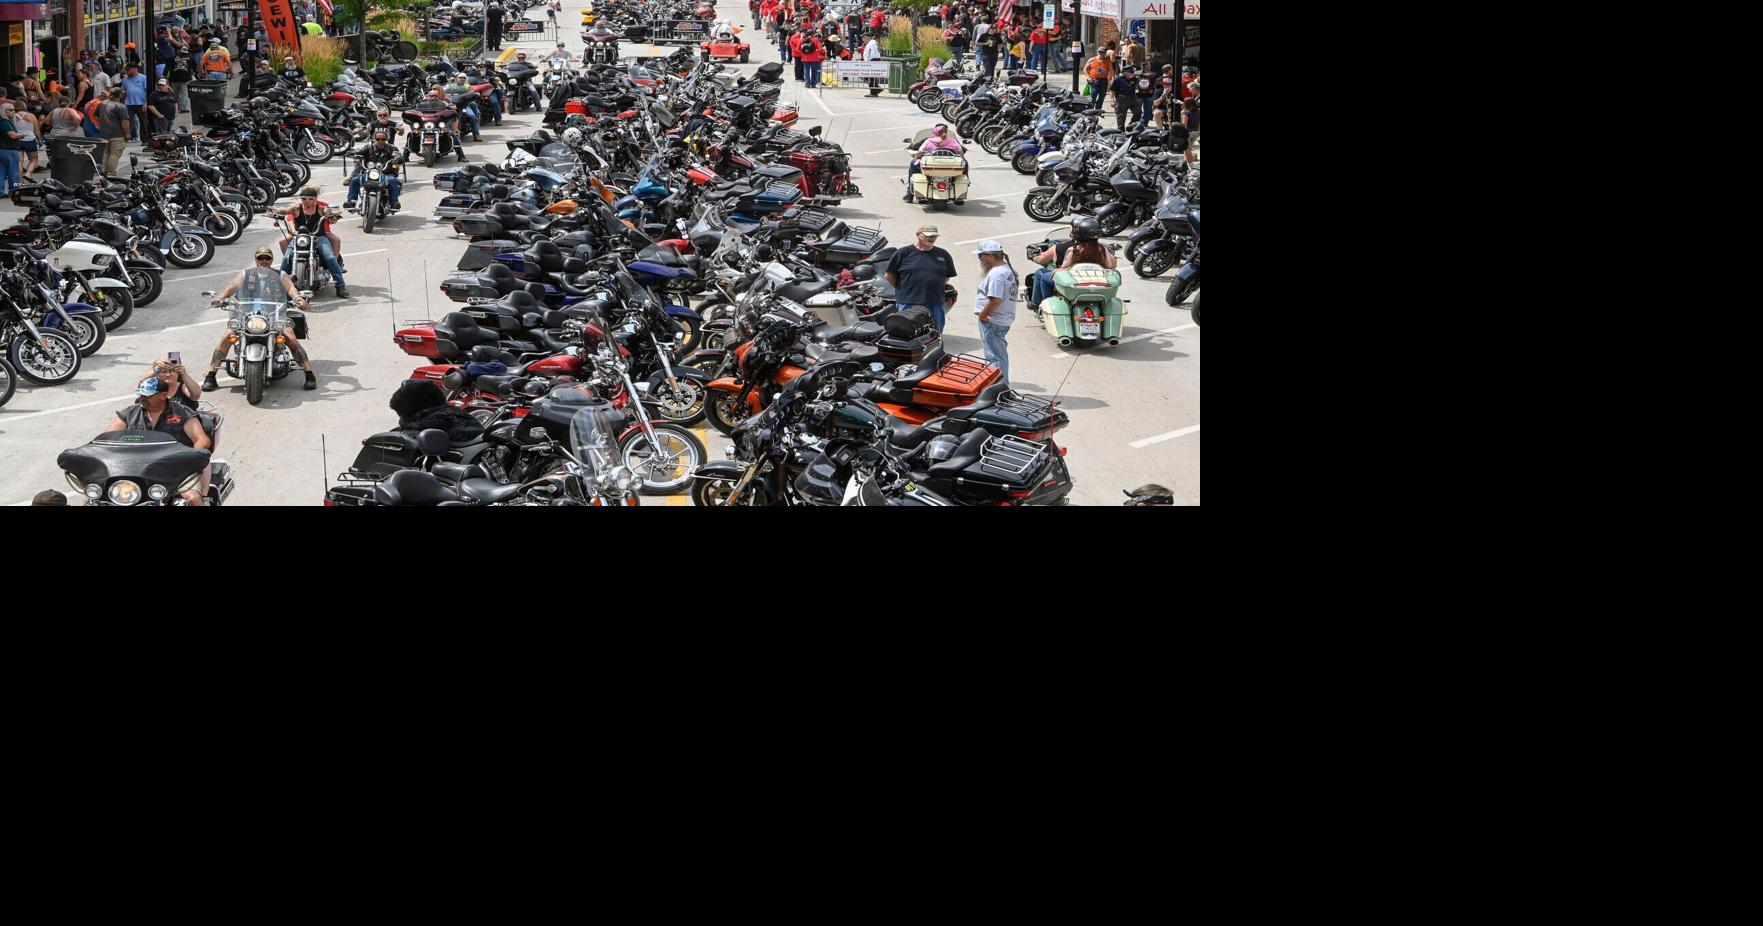 As Sturgis Rally attendance slows, planners try to build for the future